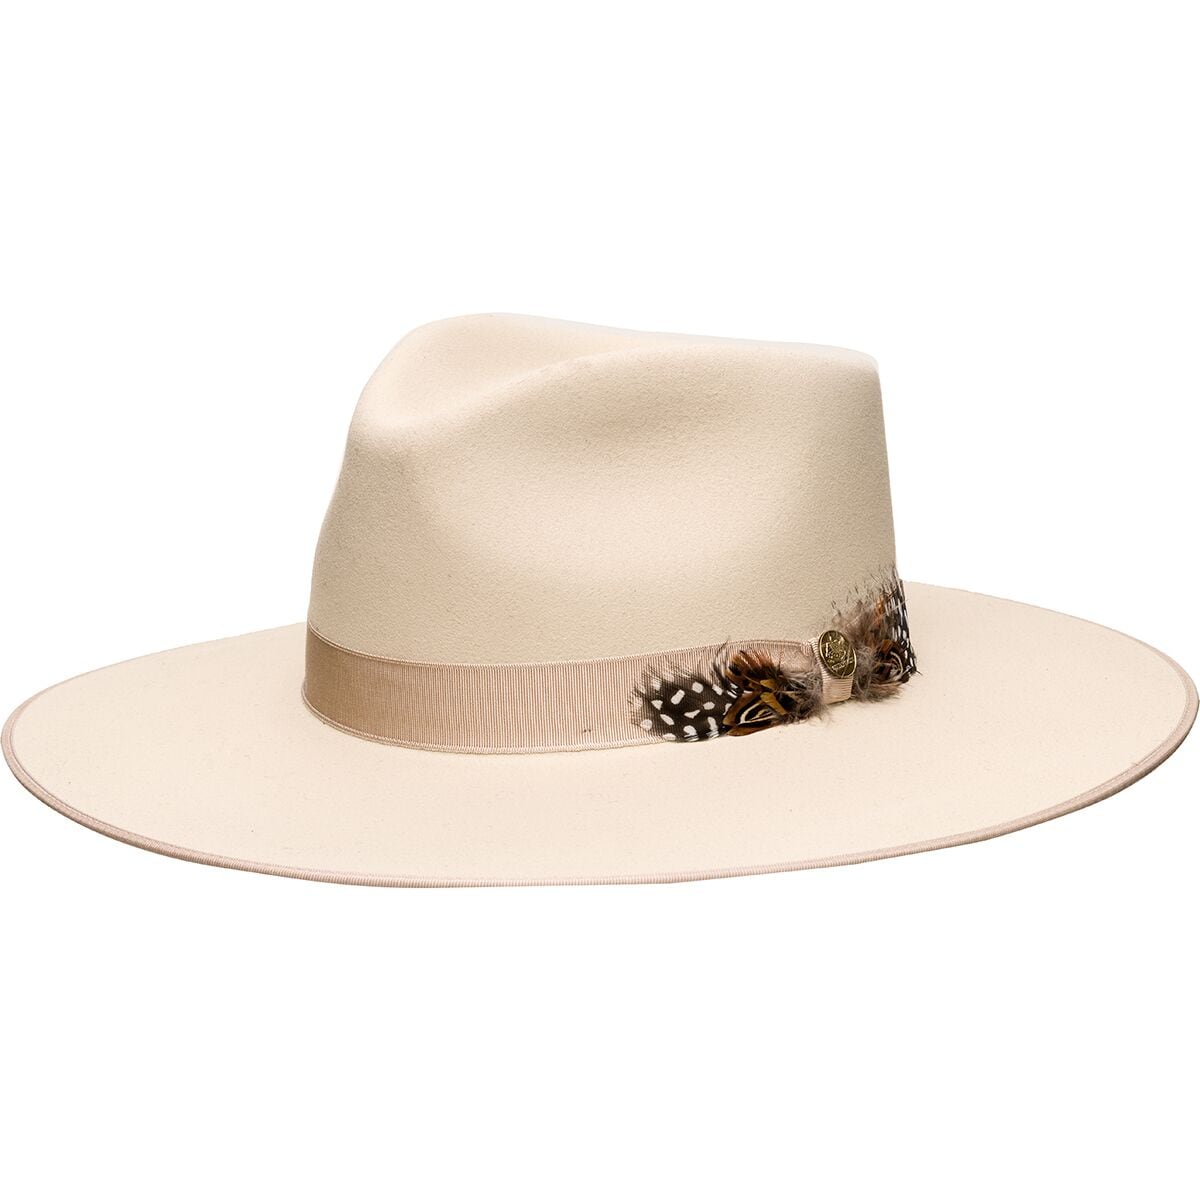 Stetson Midtown B Hat | Backcountry